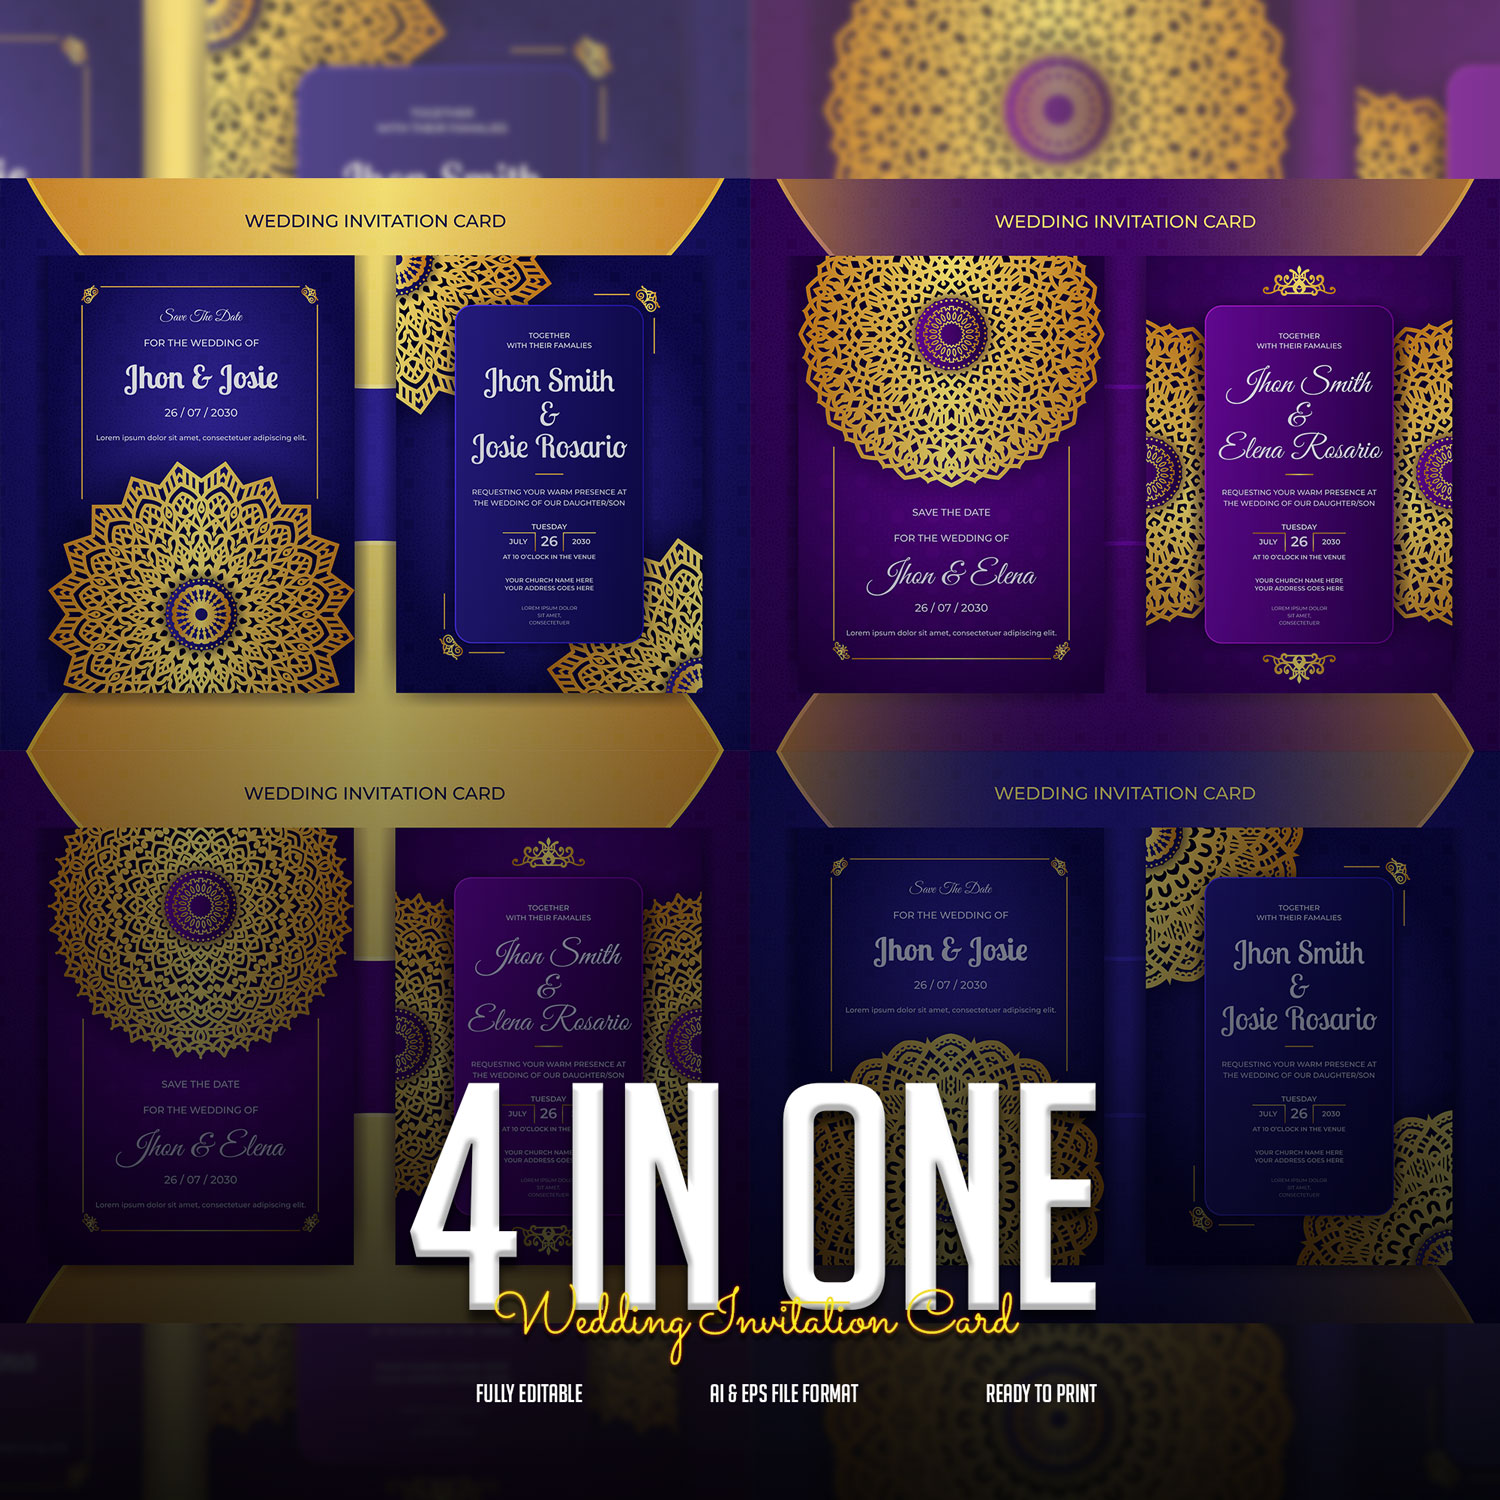 4 In One Luxury Colorful Wedding Invitation Card Only In $7 cover image.